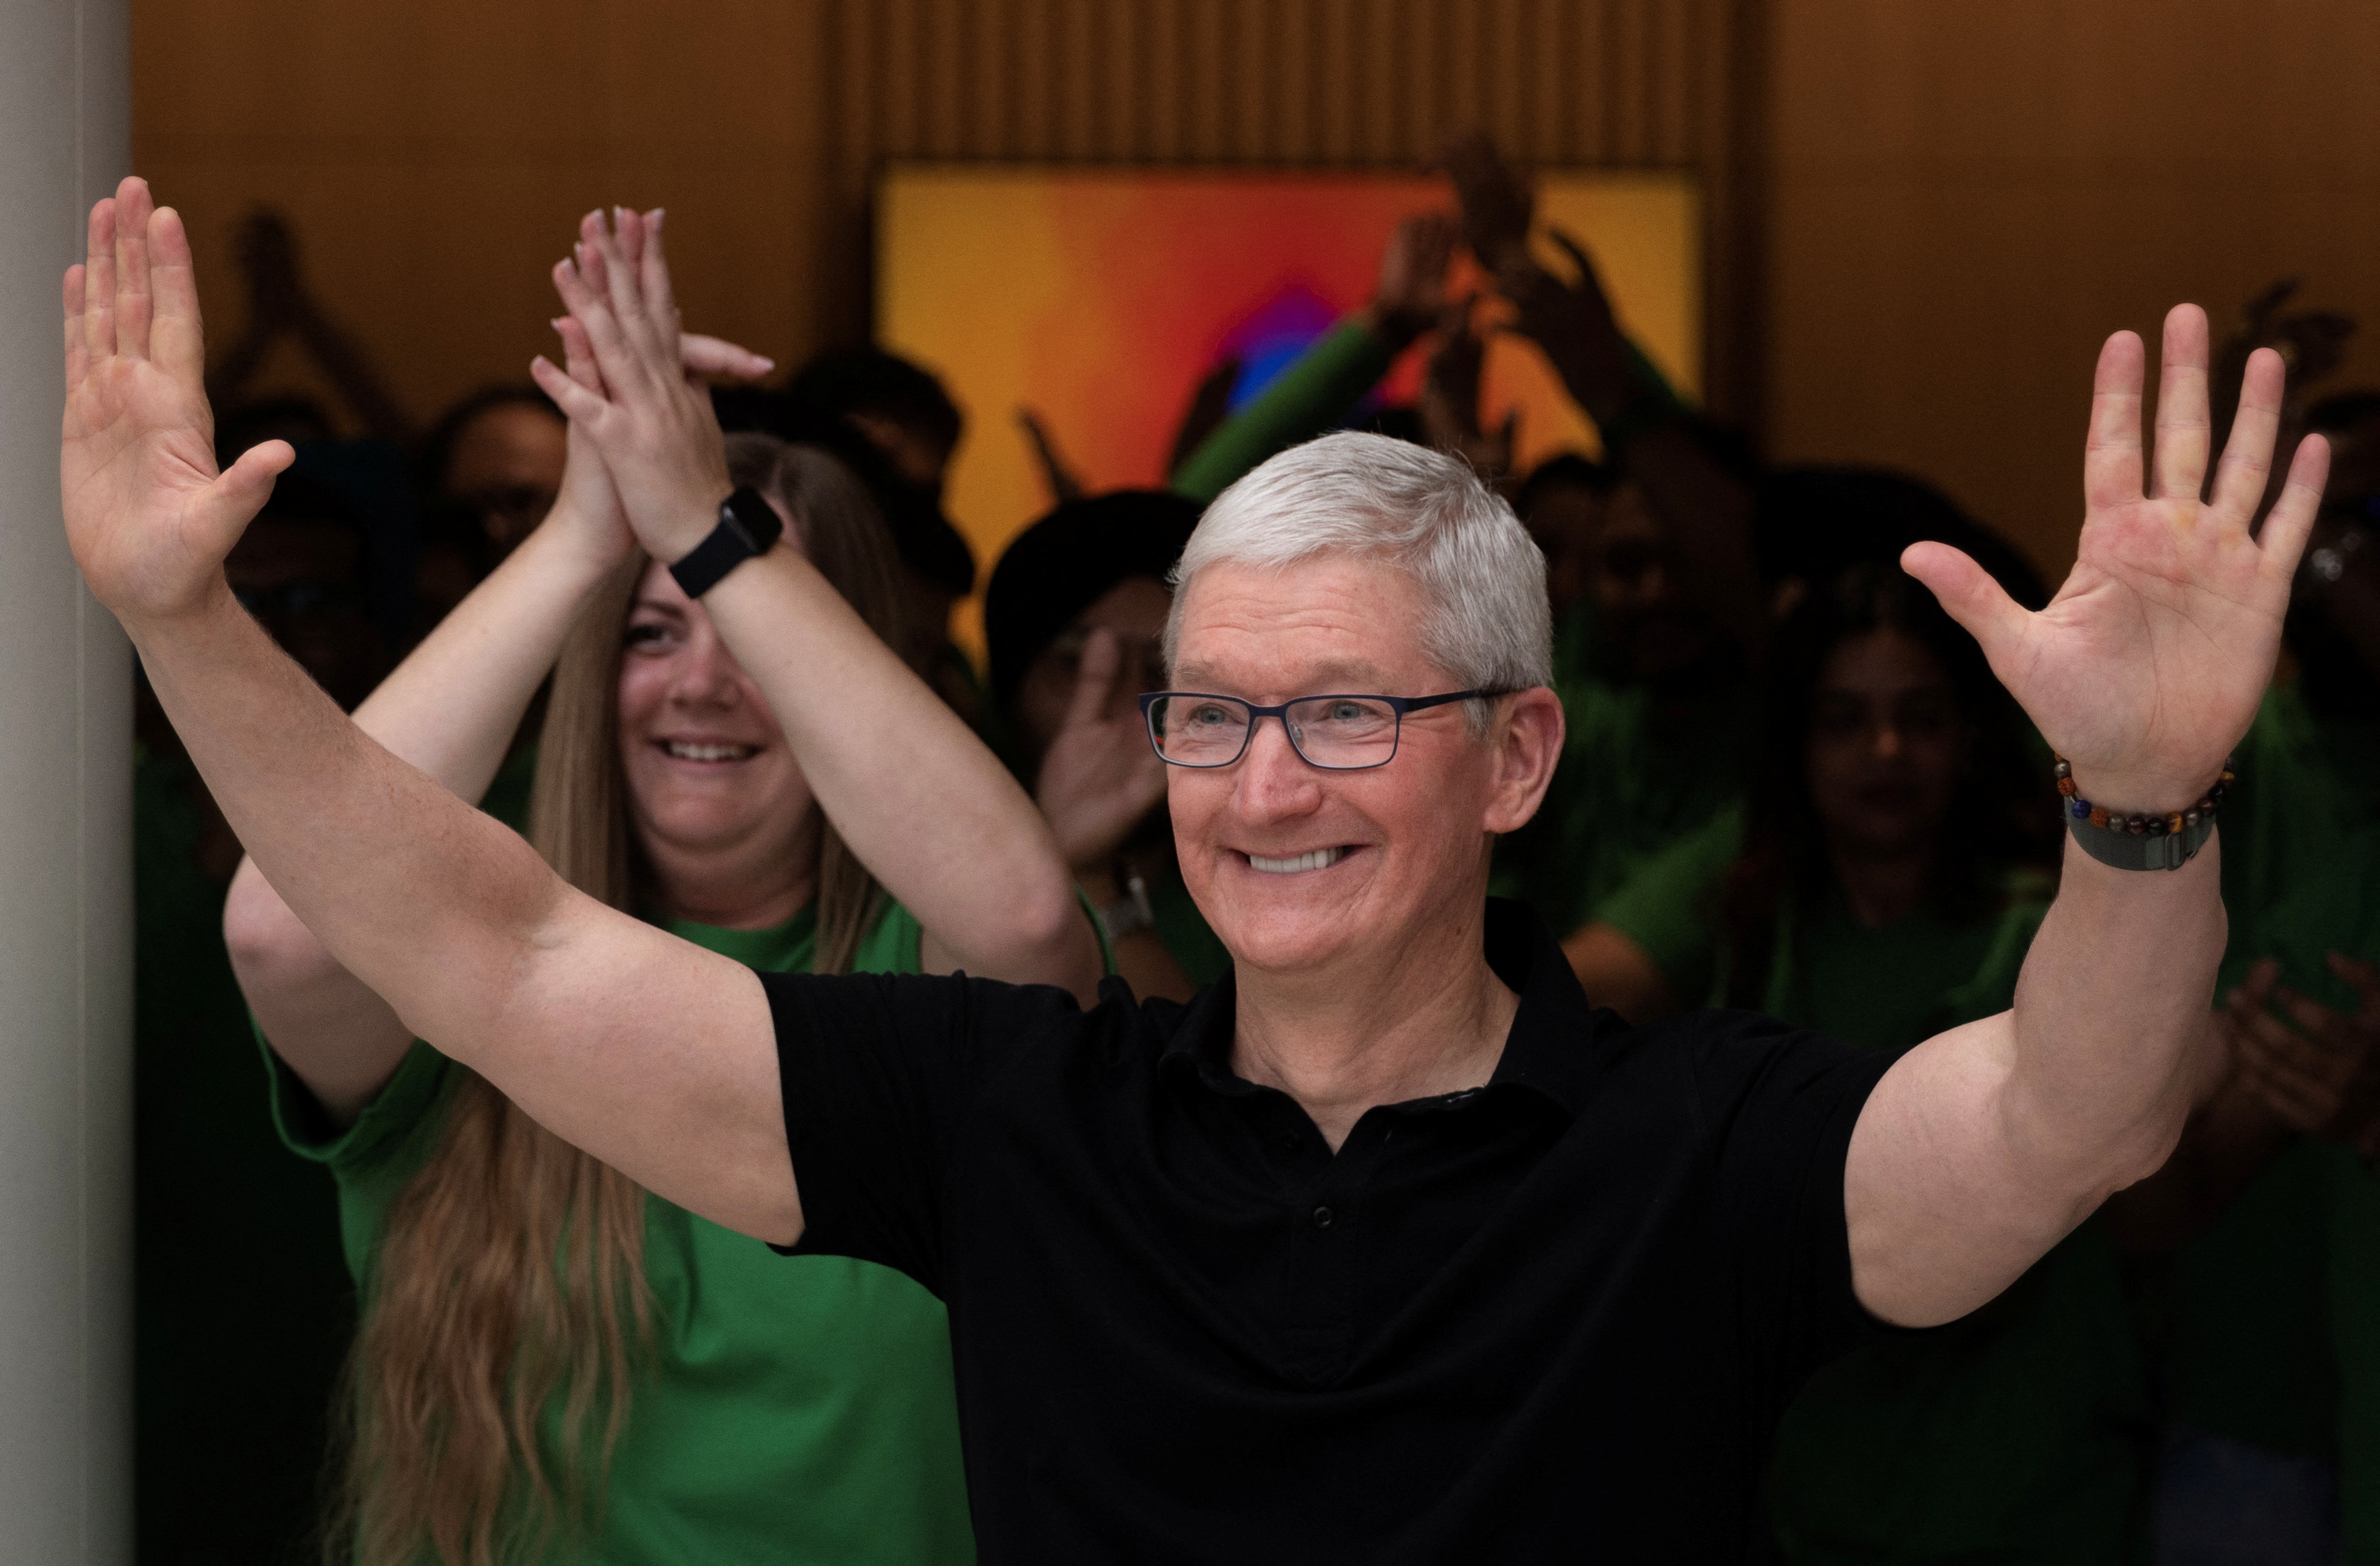 Apple gains market share in India as Wall Street analyst predicts massive upside